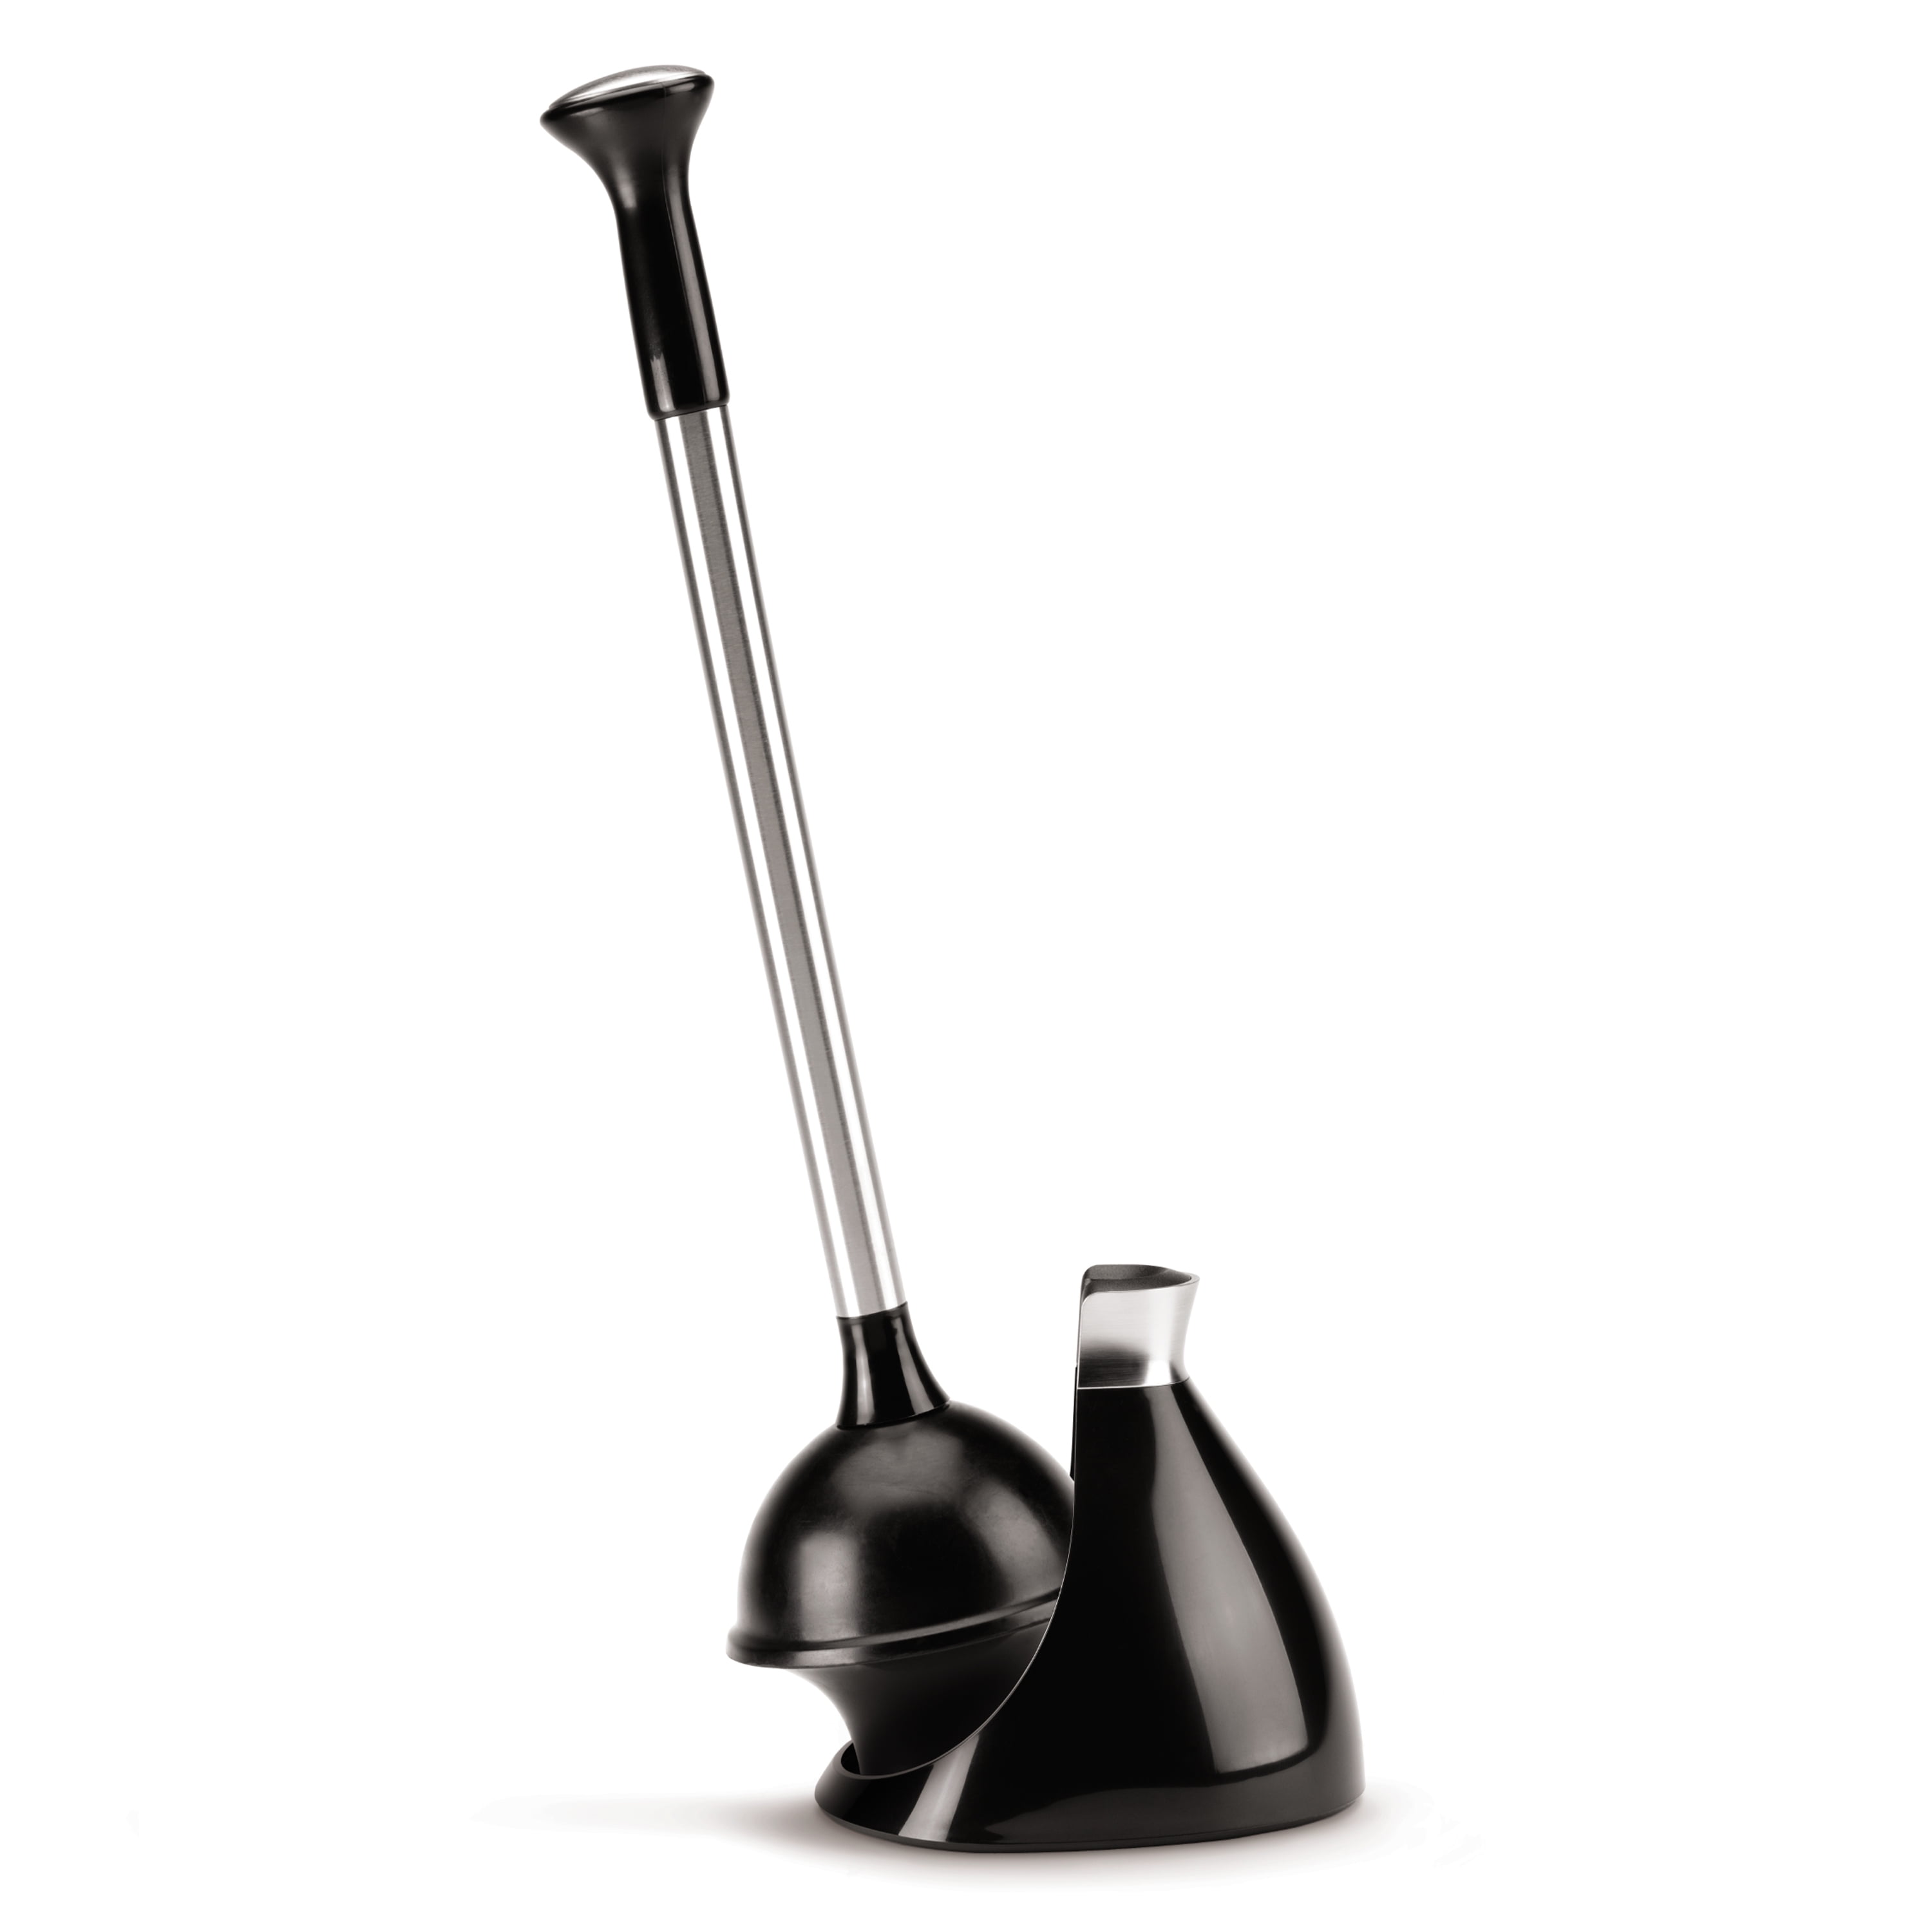 Up To 49% Off on simplehuman Toilet Plunger an